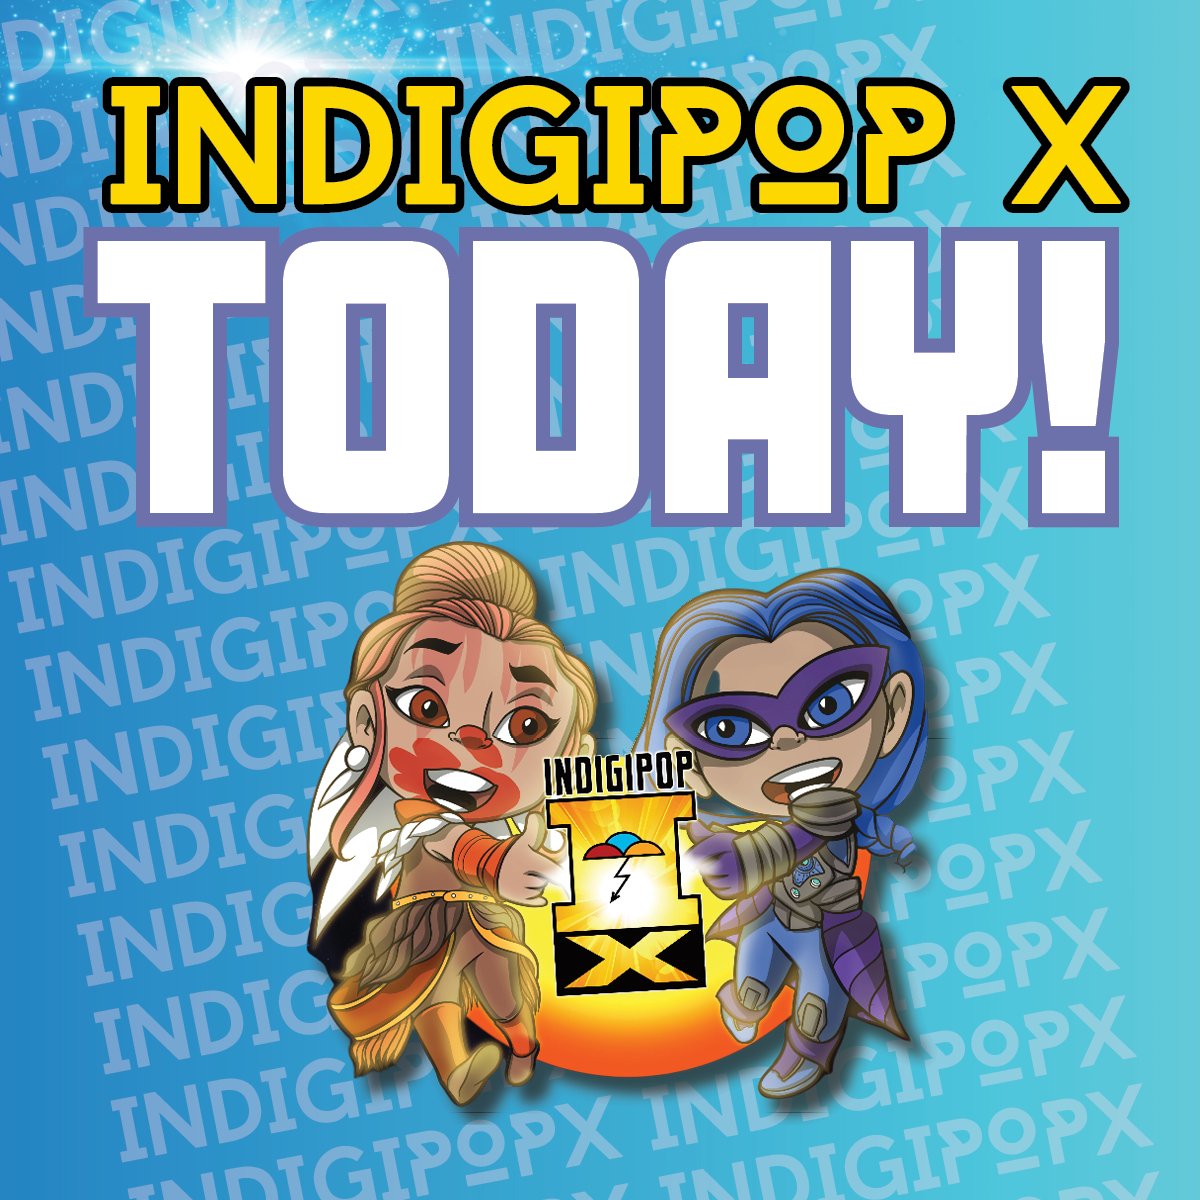 #INDIGIPOPX IS HERE! FRIDAY IS EDUCATION DAY! Highlights: ⭐️Navajo Star Wars ⭐️ Puppetry Performance & Parade ⭐️ Youth Cosplay Stickball ⭐️ & More! Full program ➡️ indigenouscomiccon.com/programming-de… 📍@FAMokMuseum 🎟️ indigipopx.com (tix + info) #IPXatFAM #EveryoneWelcome